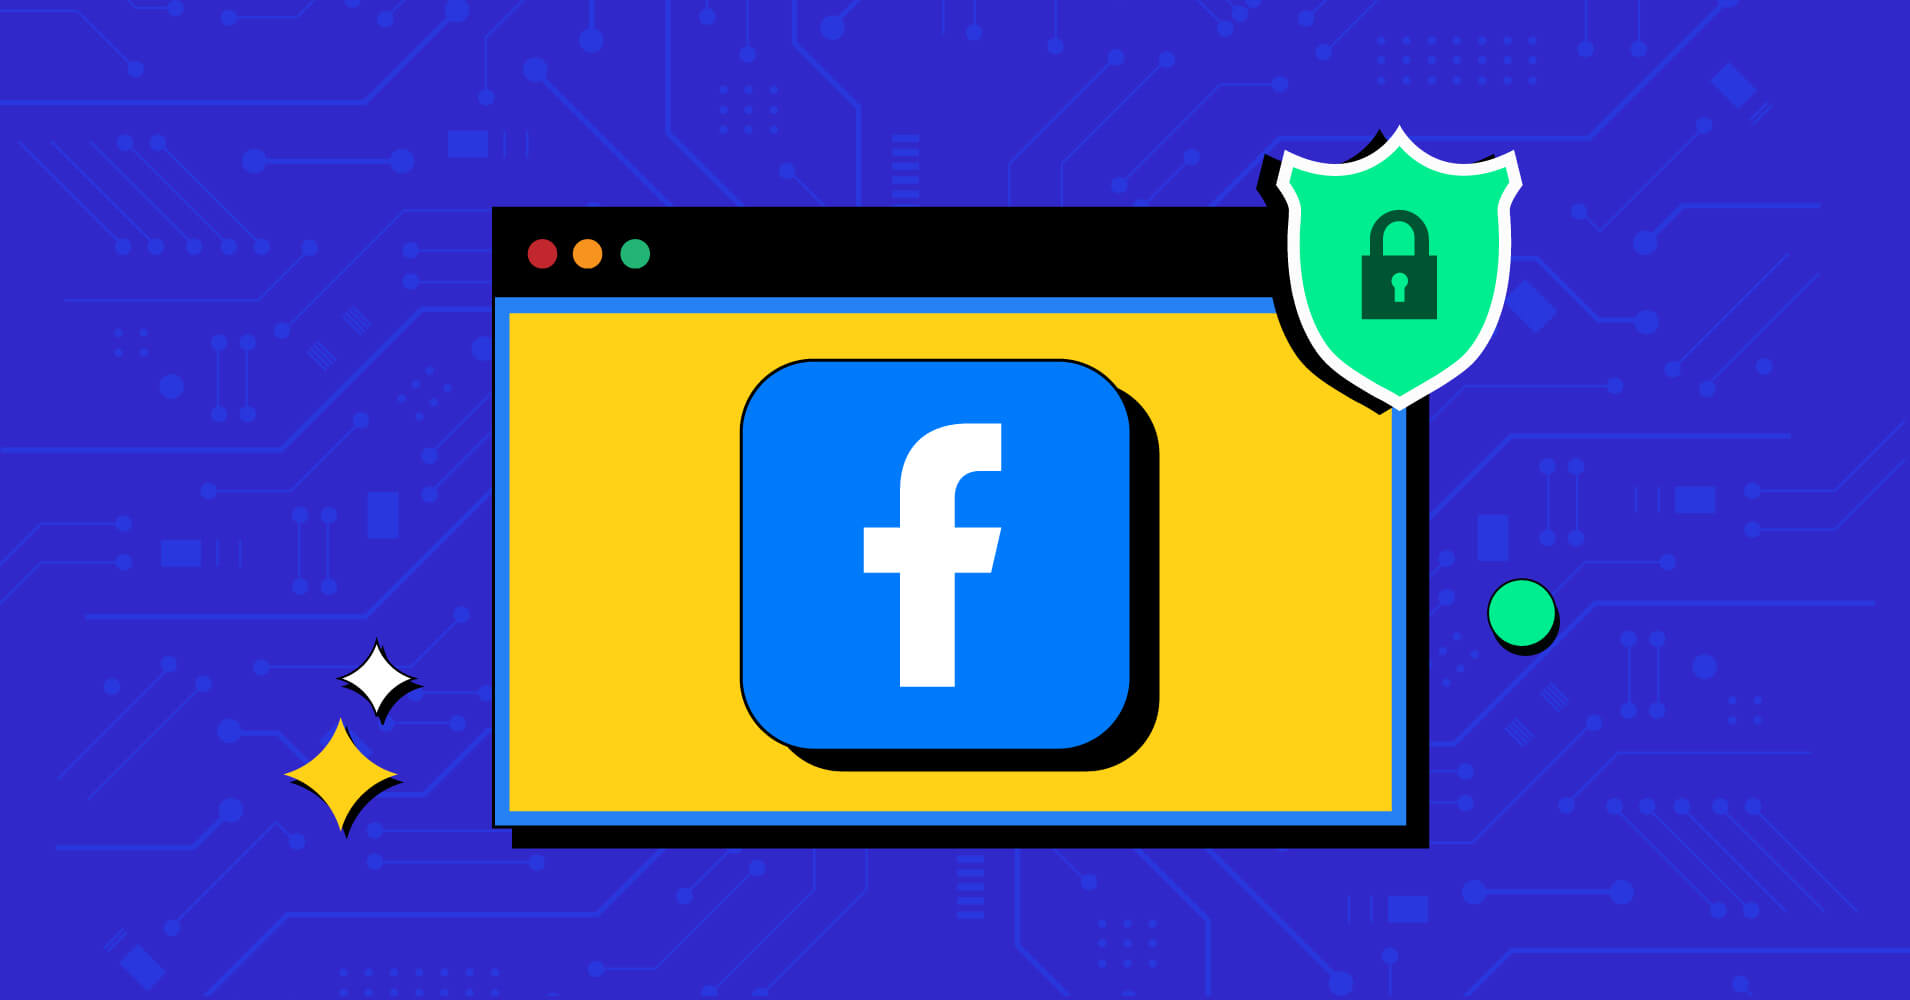 How to Get Facebook Access Token in 2 Minutes